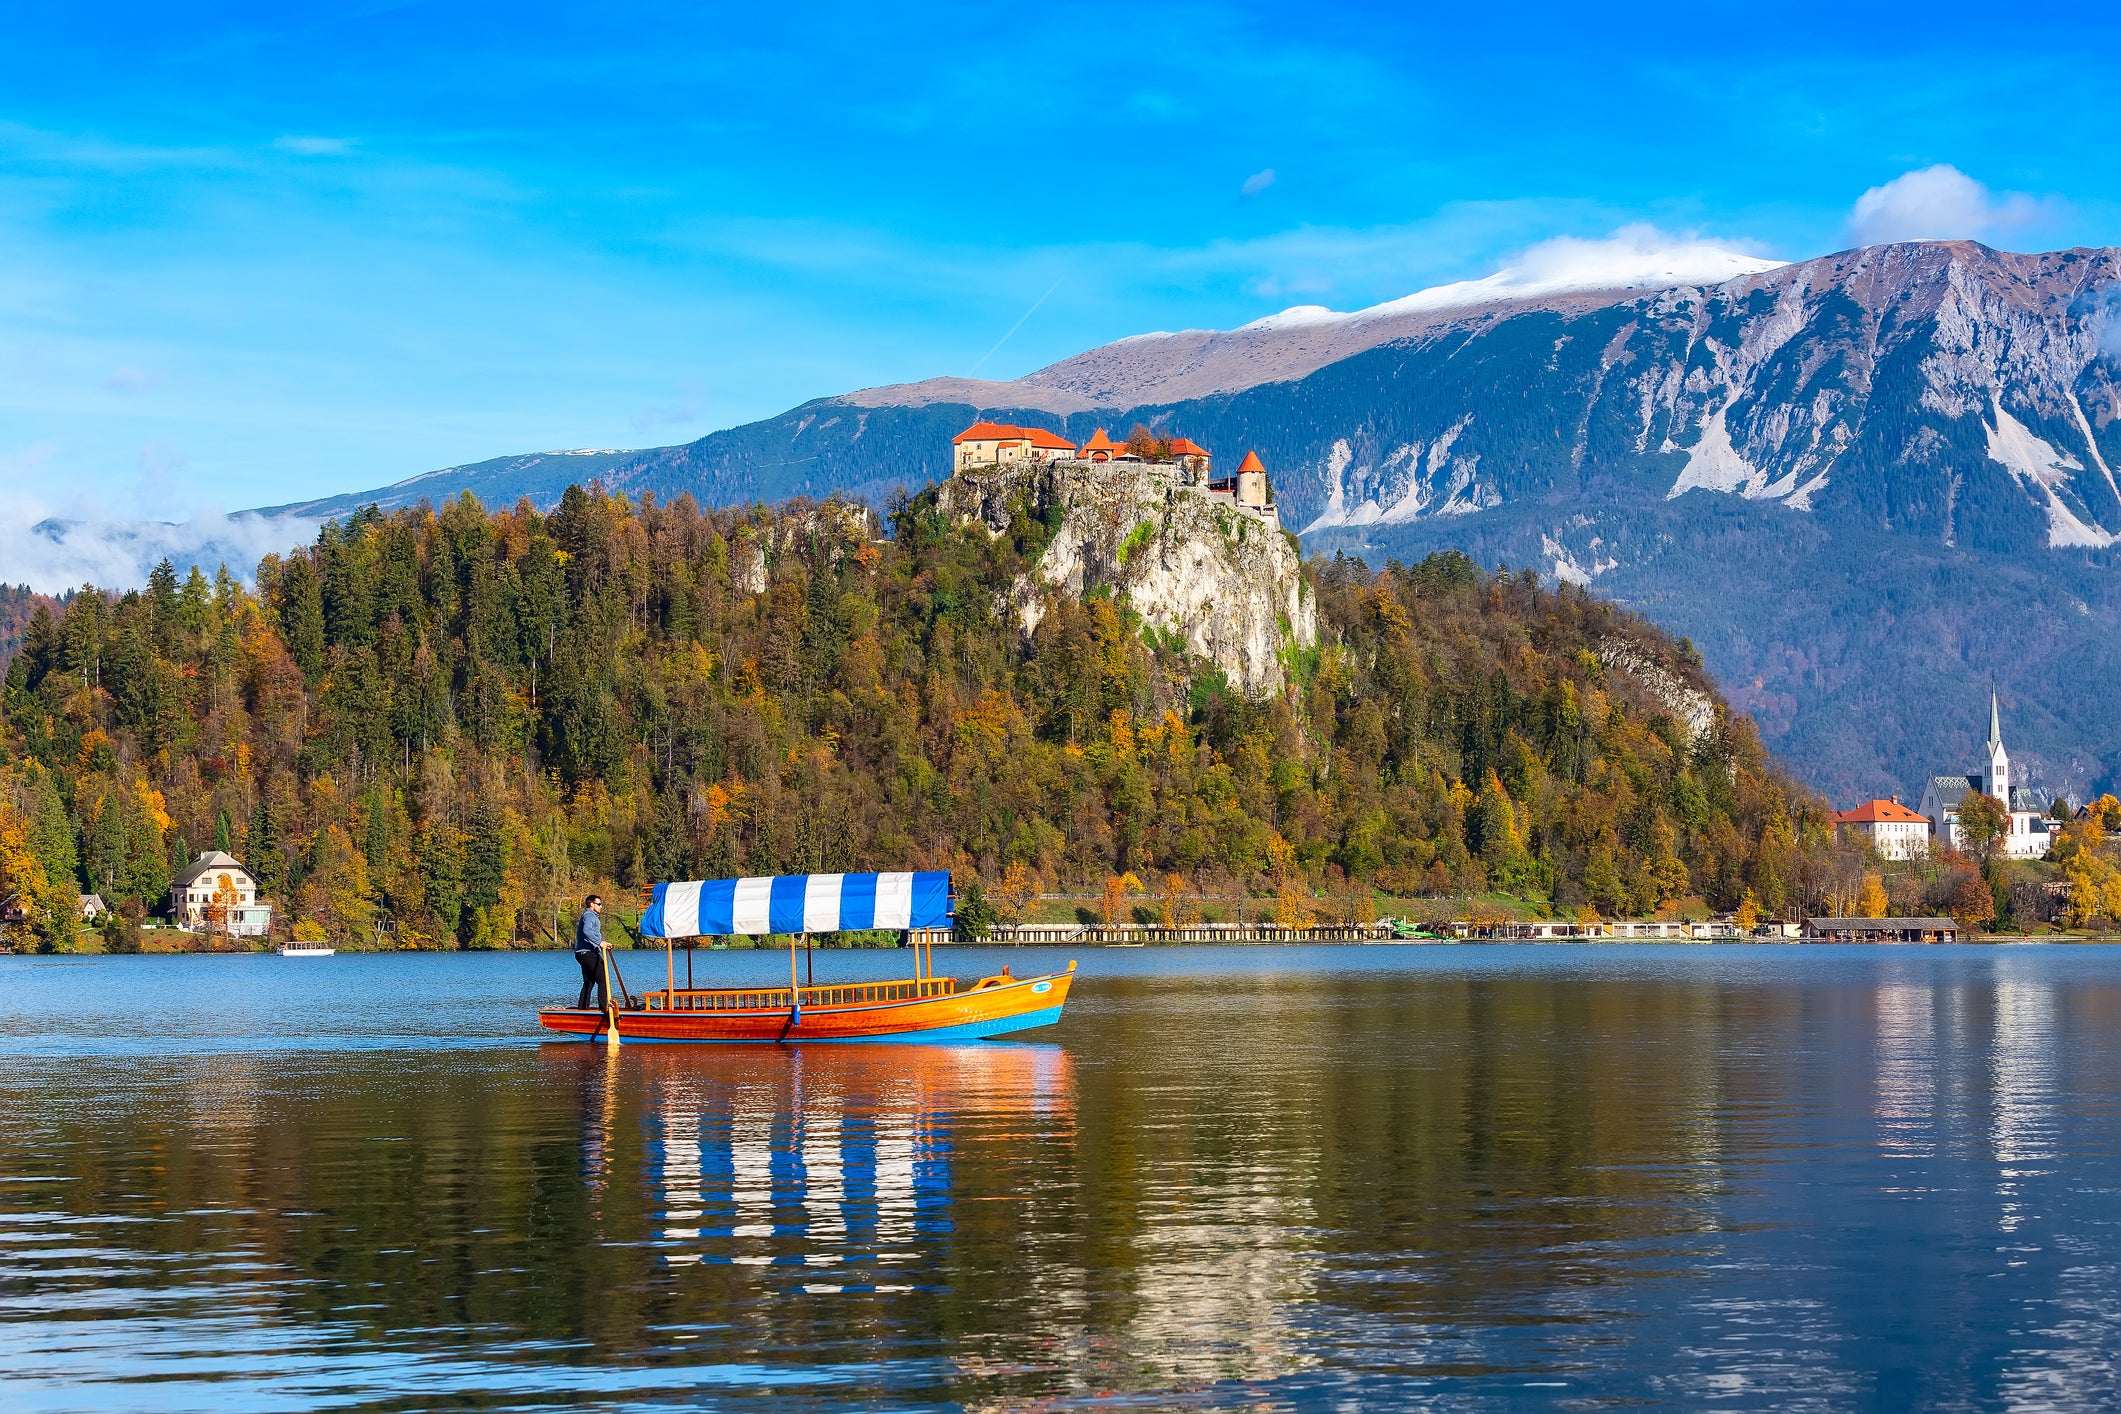 Slovenia’s most popular tourist destination, Lake Bled, is a fairytale setting for solos